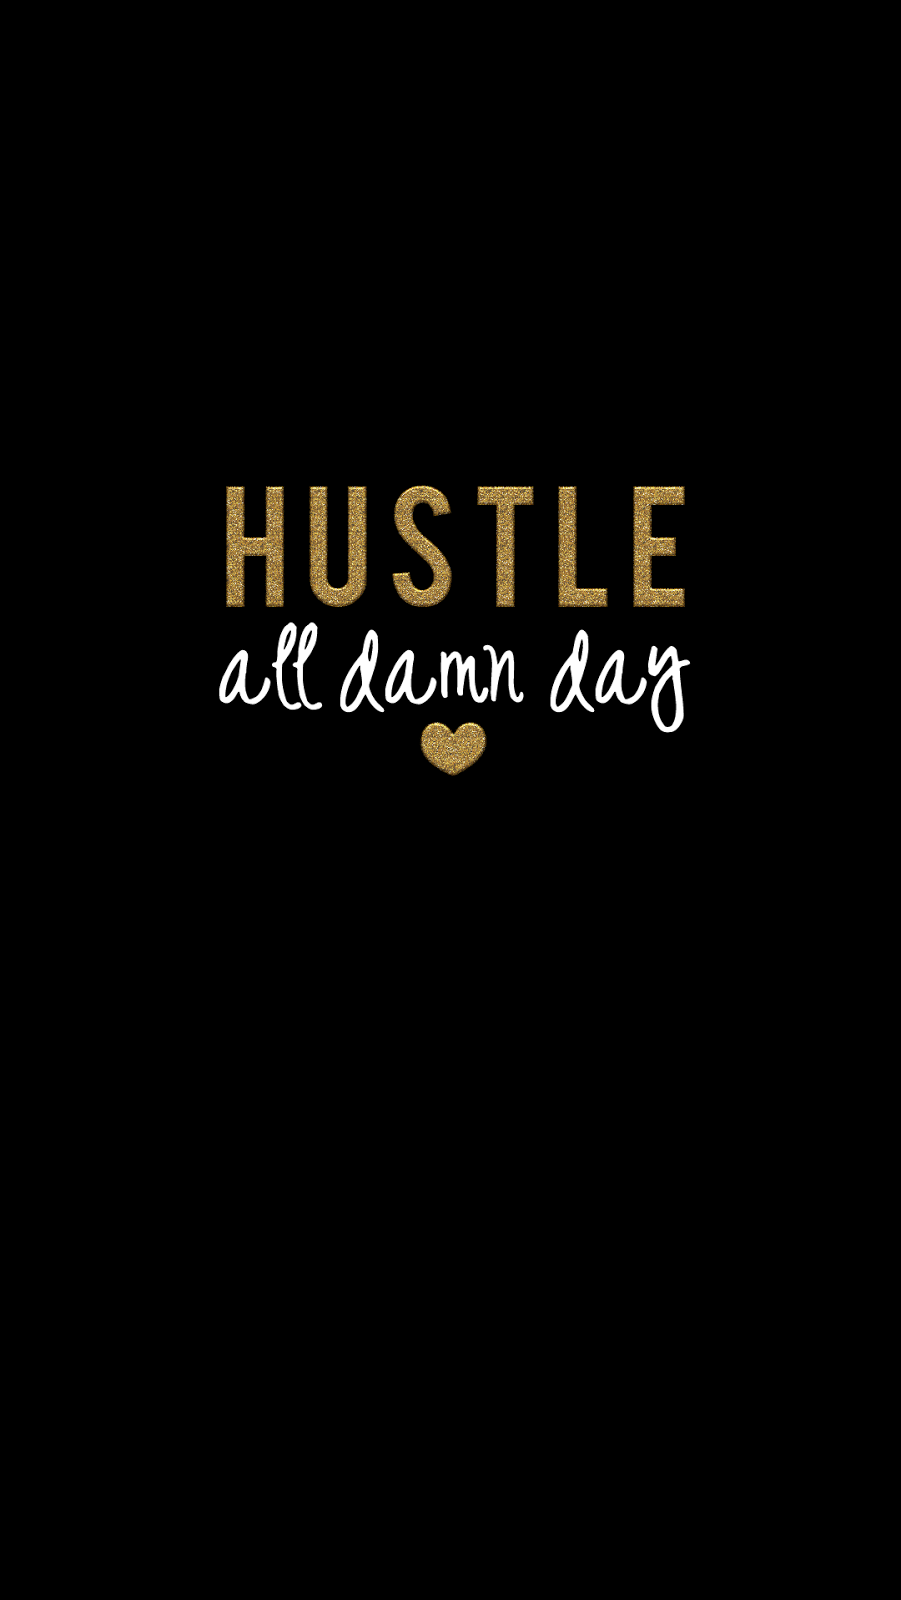 risspected AGe. Hustle quotes inspiration, Hustle quotes, Quotes